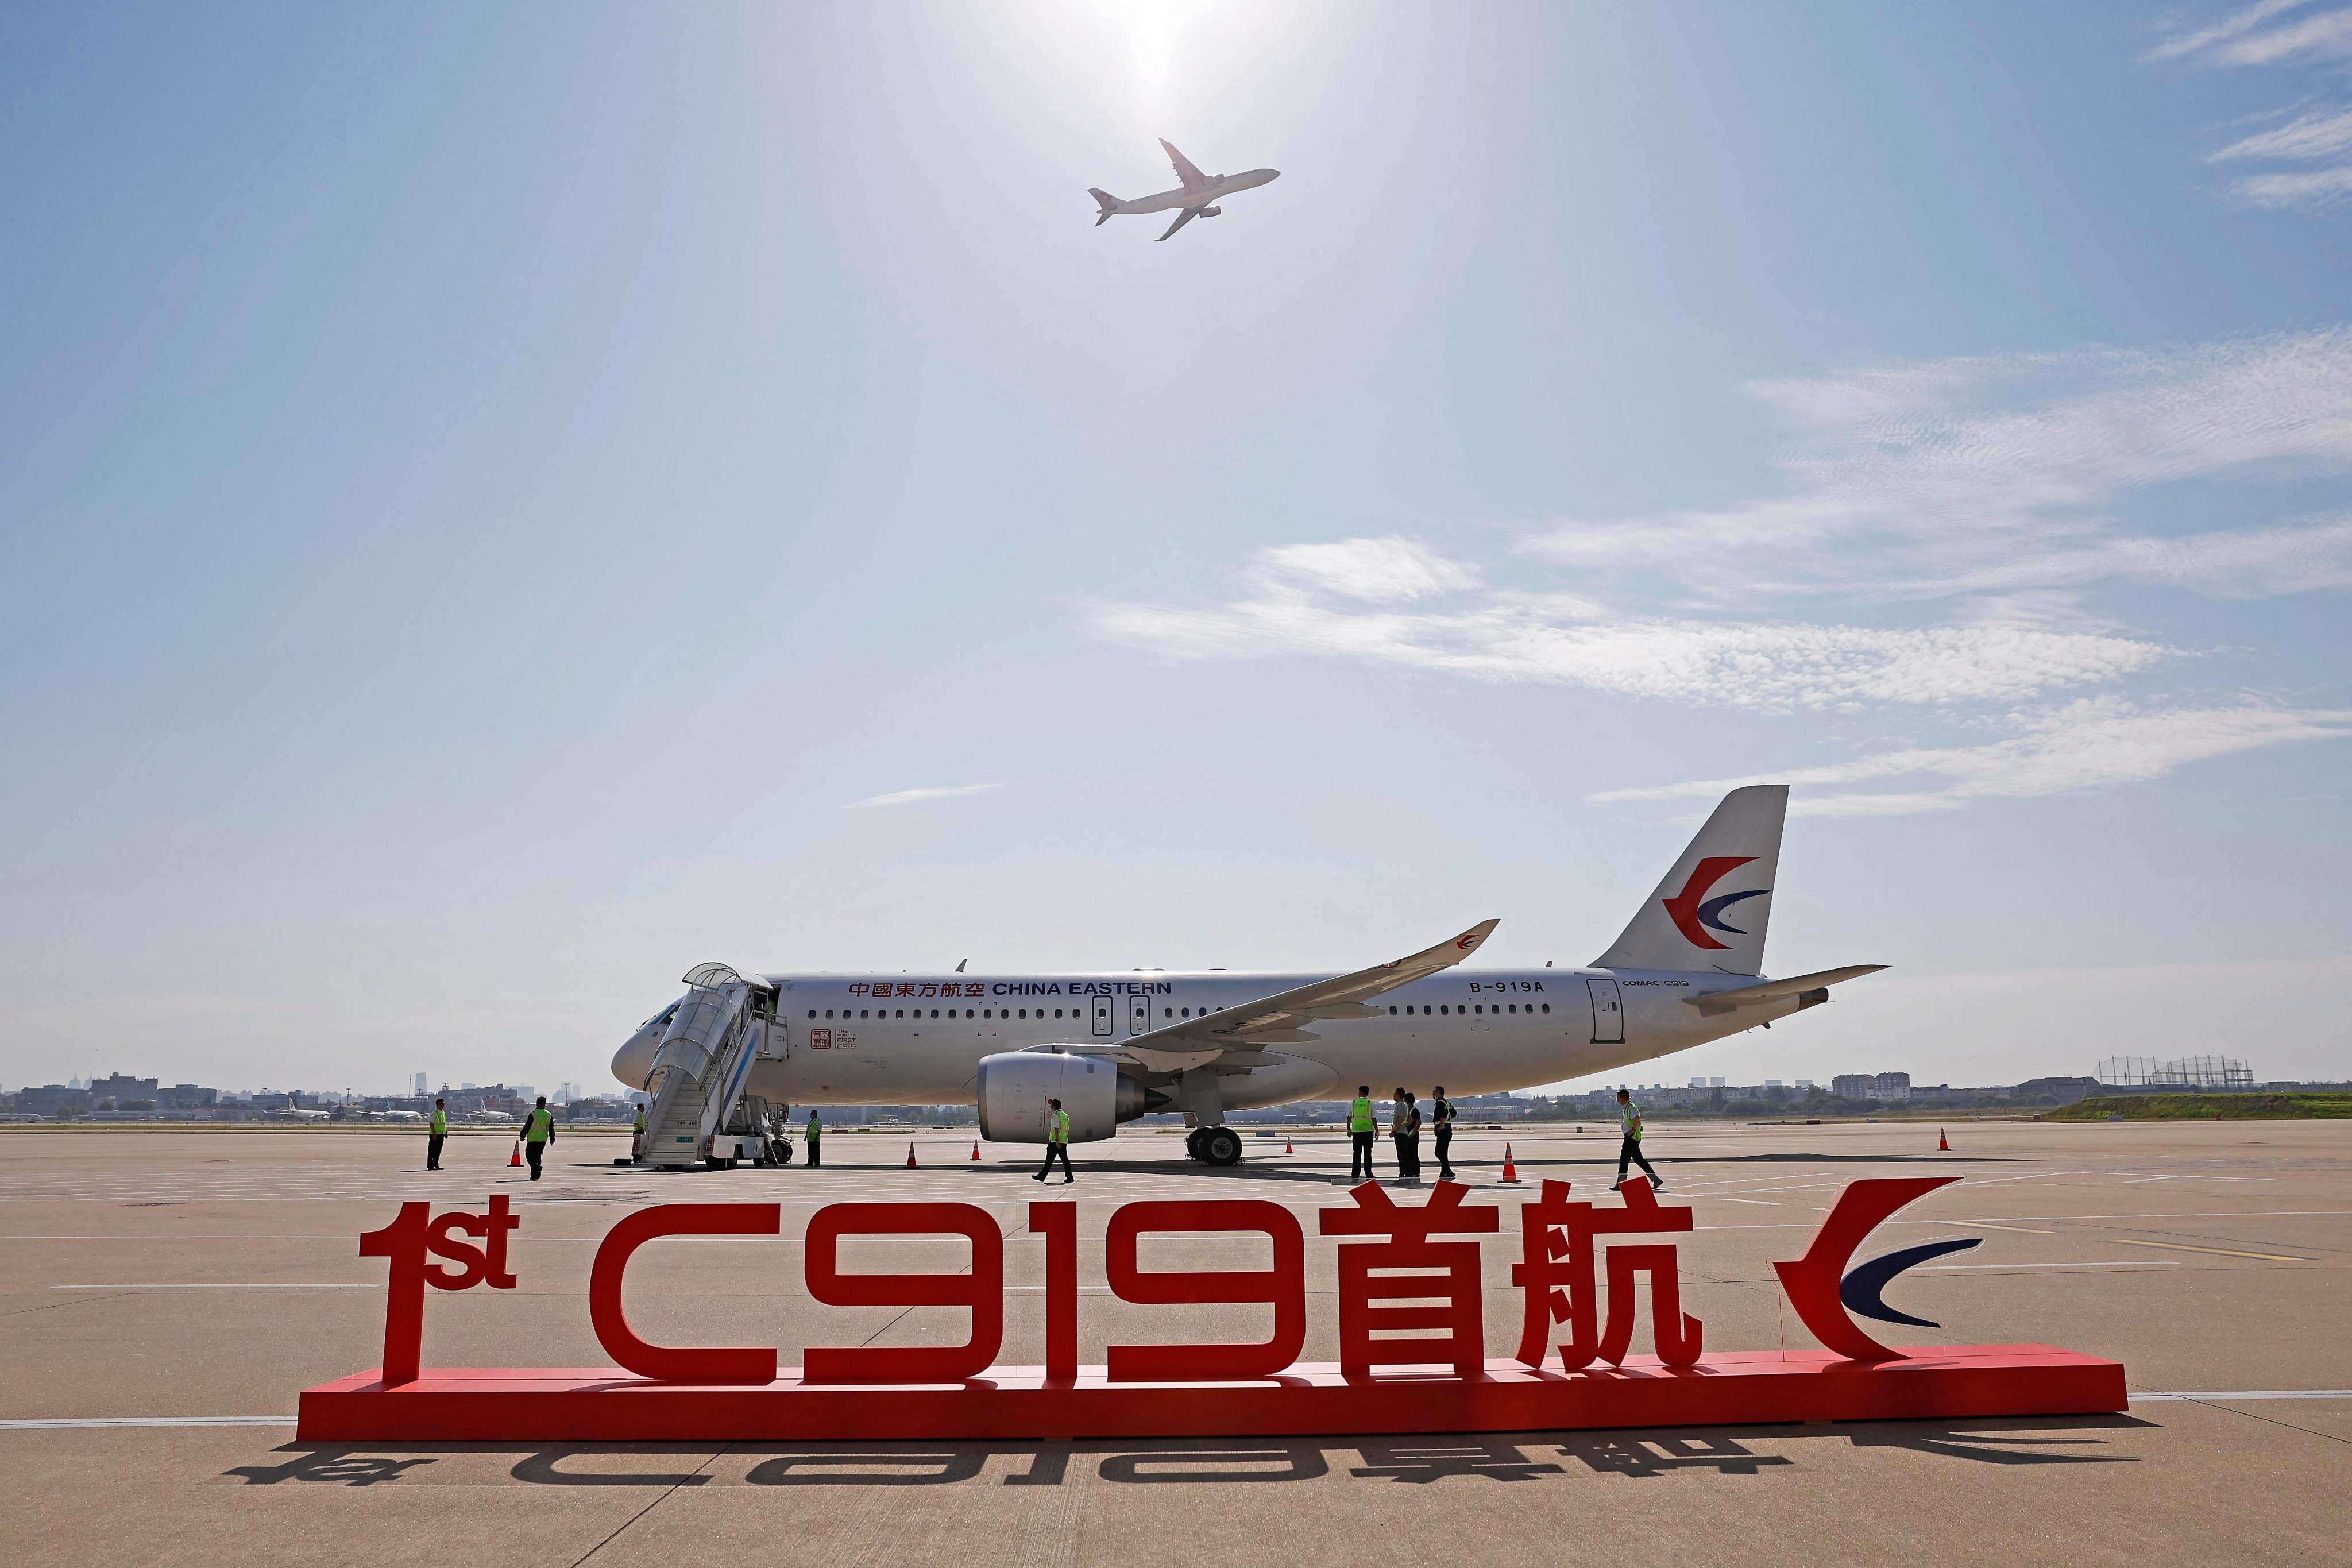 China’s first domestically produced passenger jet, the C919, is seen before a flight from Shanghai to Beijing at Shanghai Hongqiao Airport on May 28. Its first commercial flight was a milestone event in the nation’s decades-long effort to compete with Western rivals in aviation. Photo: AFP